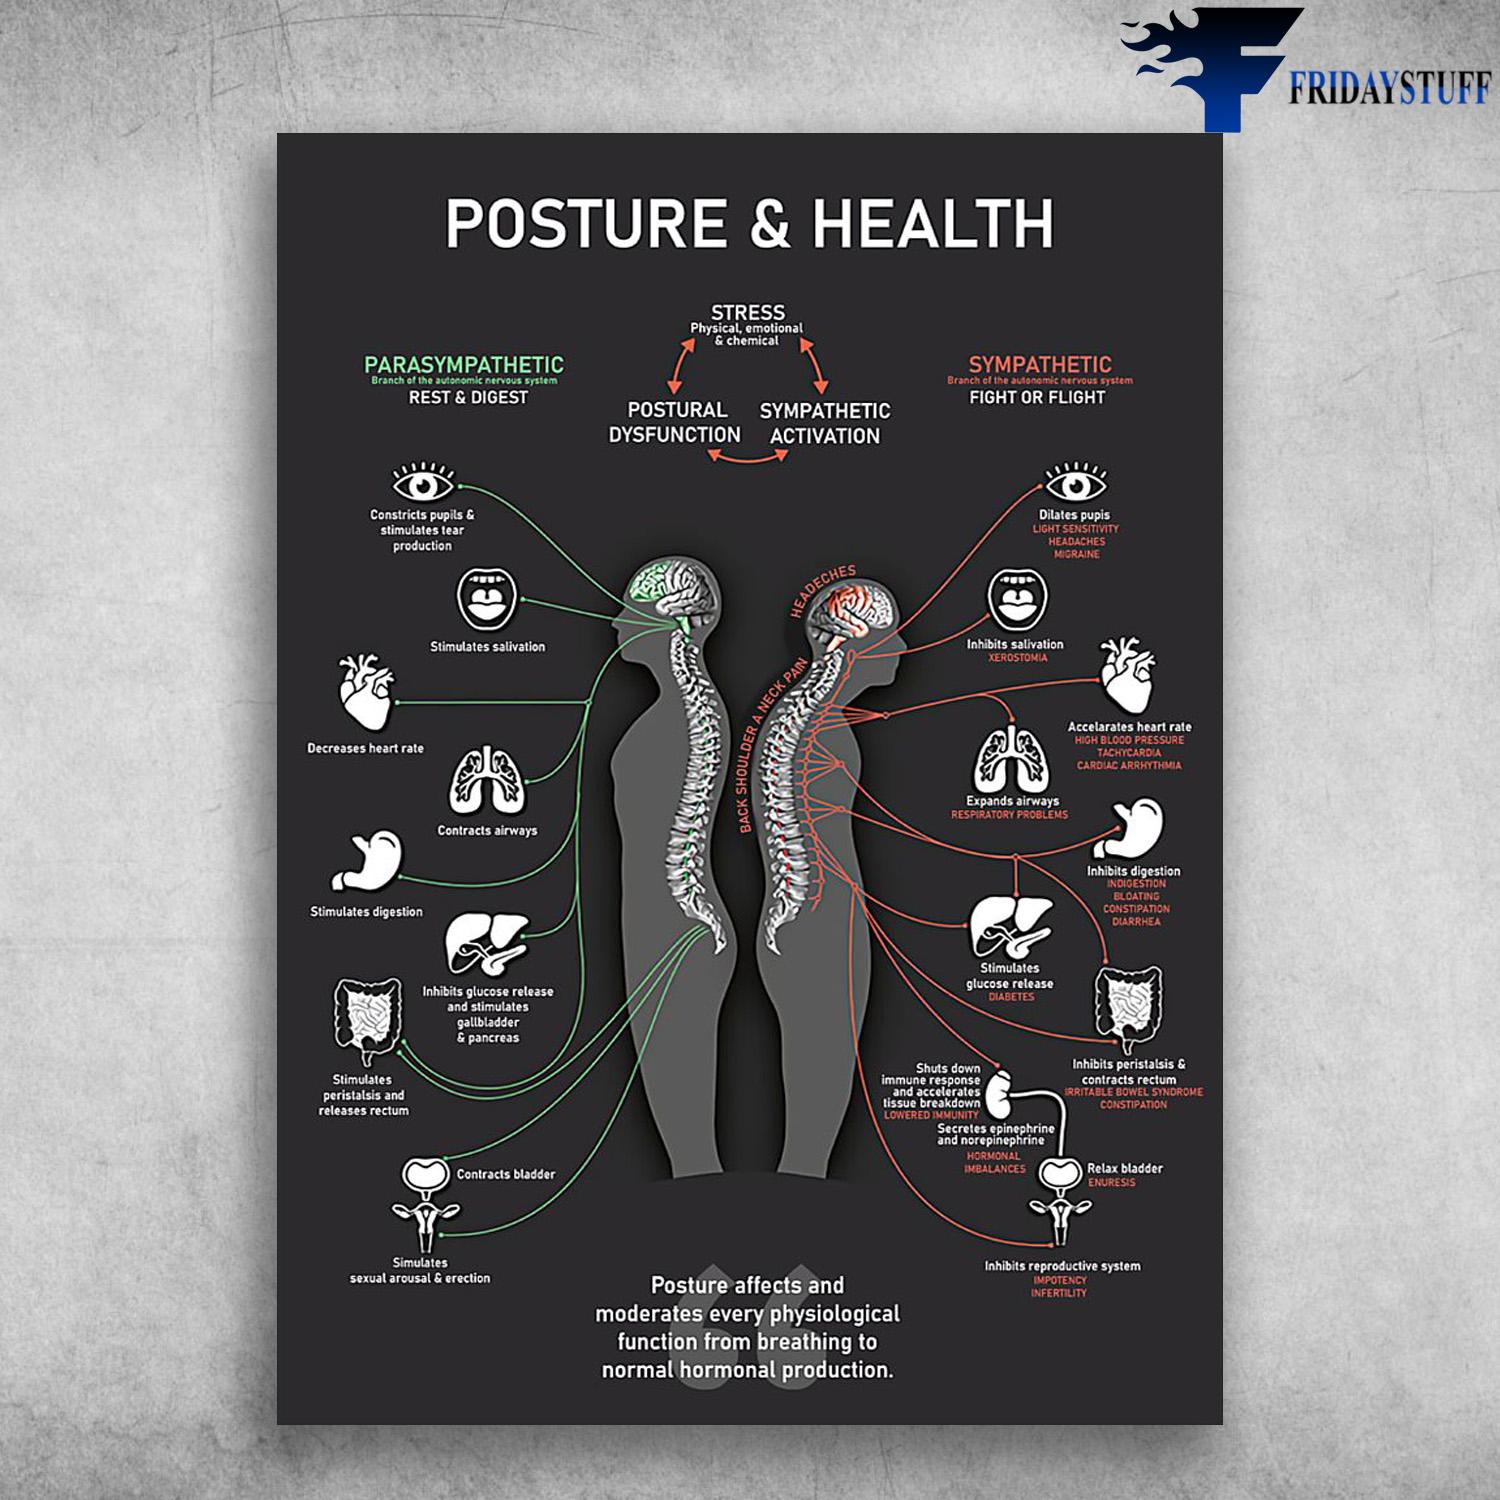 Chiropractic Poster, Posture And Heath, Parasympathetic, Rest And Digest, Sympathetic Fight Or Flight